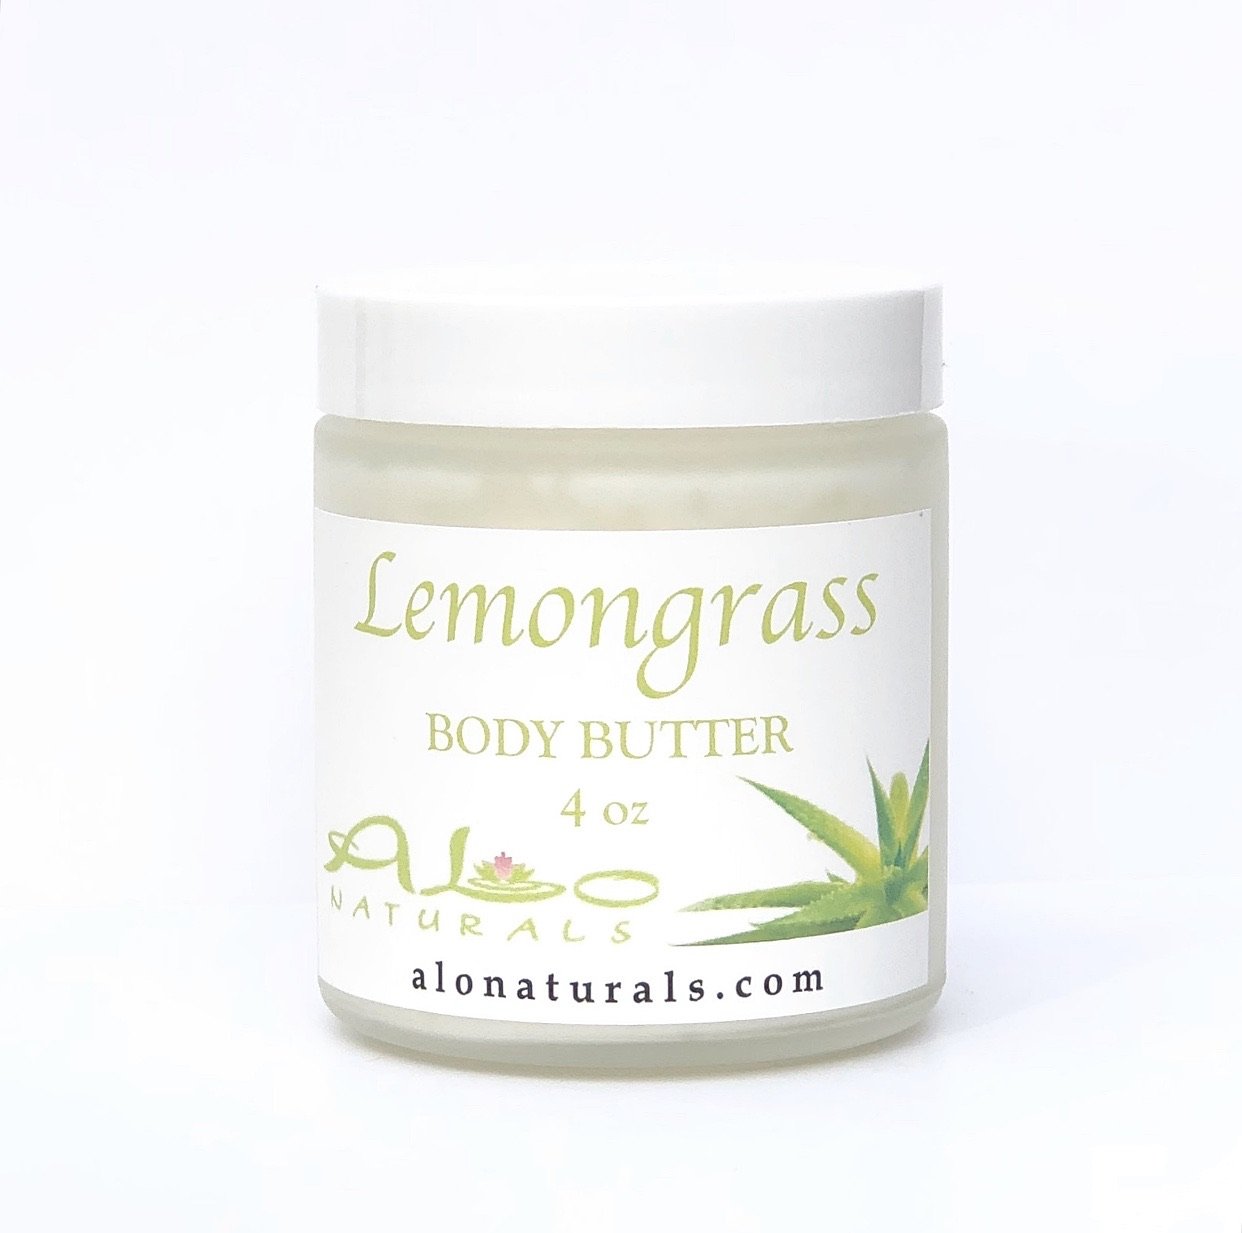 All natural Lemongrass scented body butter.  Formulated to heal and hydrate the skin.  4oz jar.